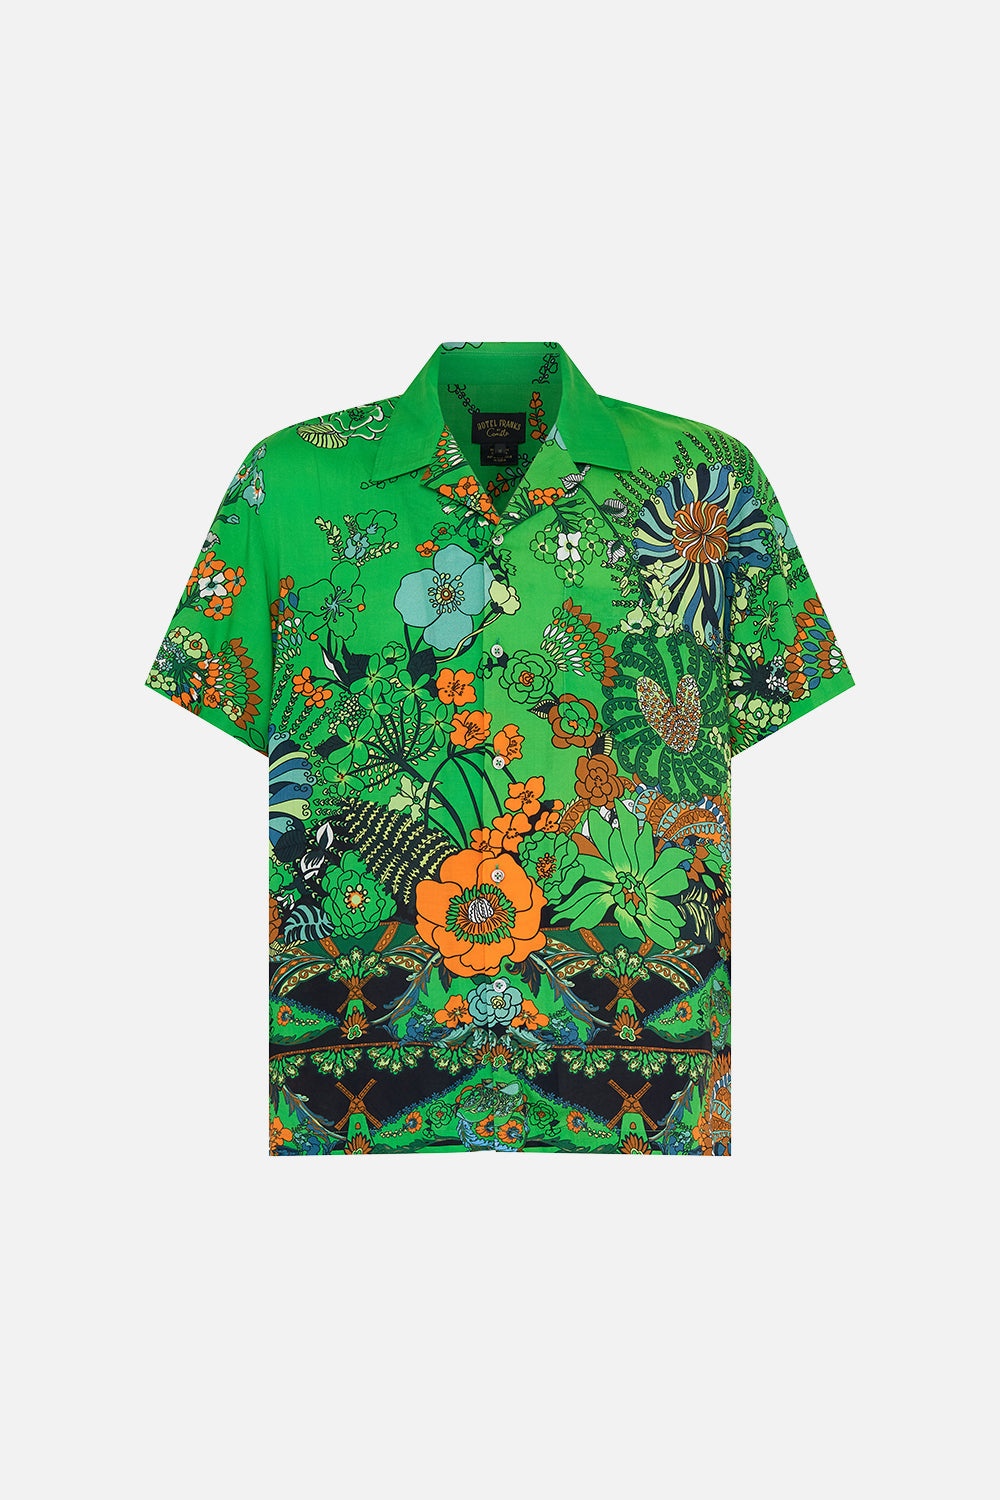 CAMILLA green short sleeve camp collared shirt in Good Vibes Generation